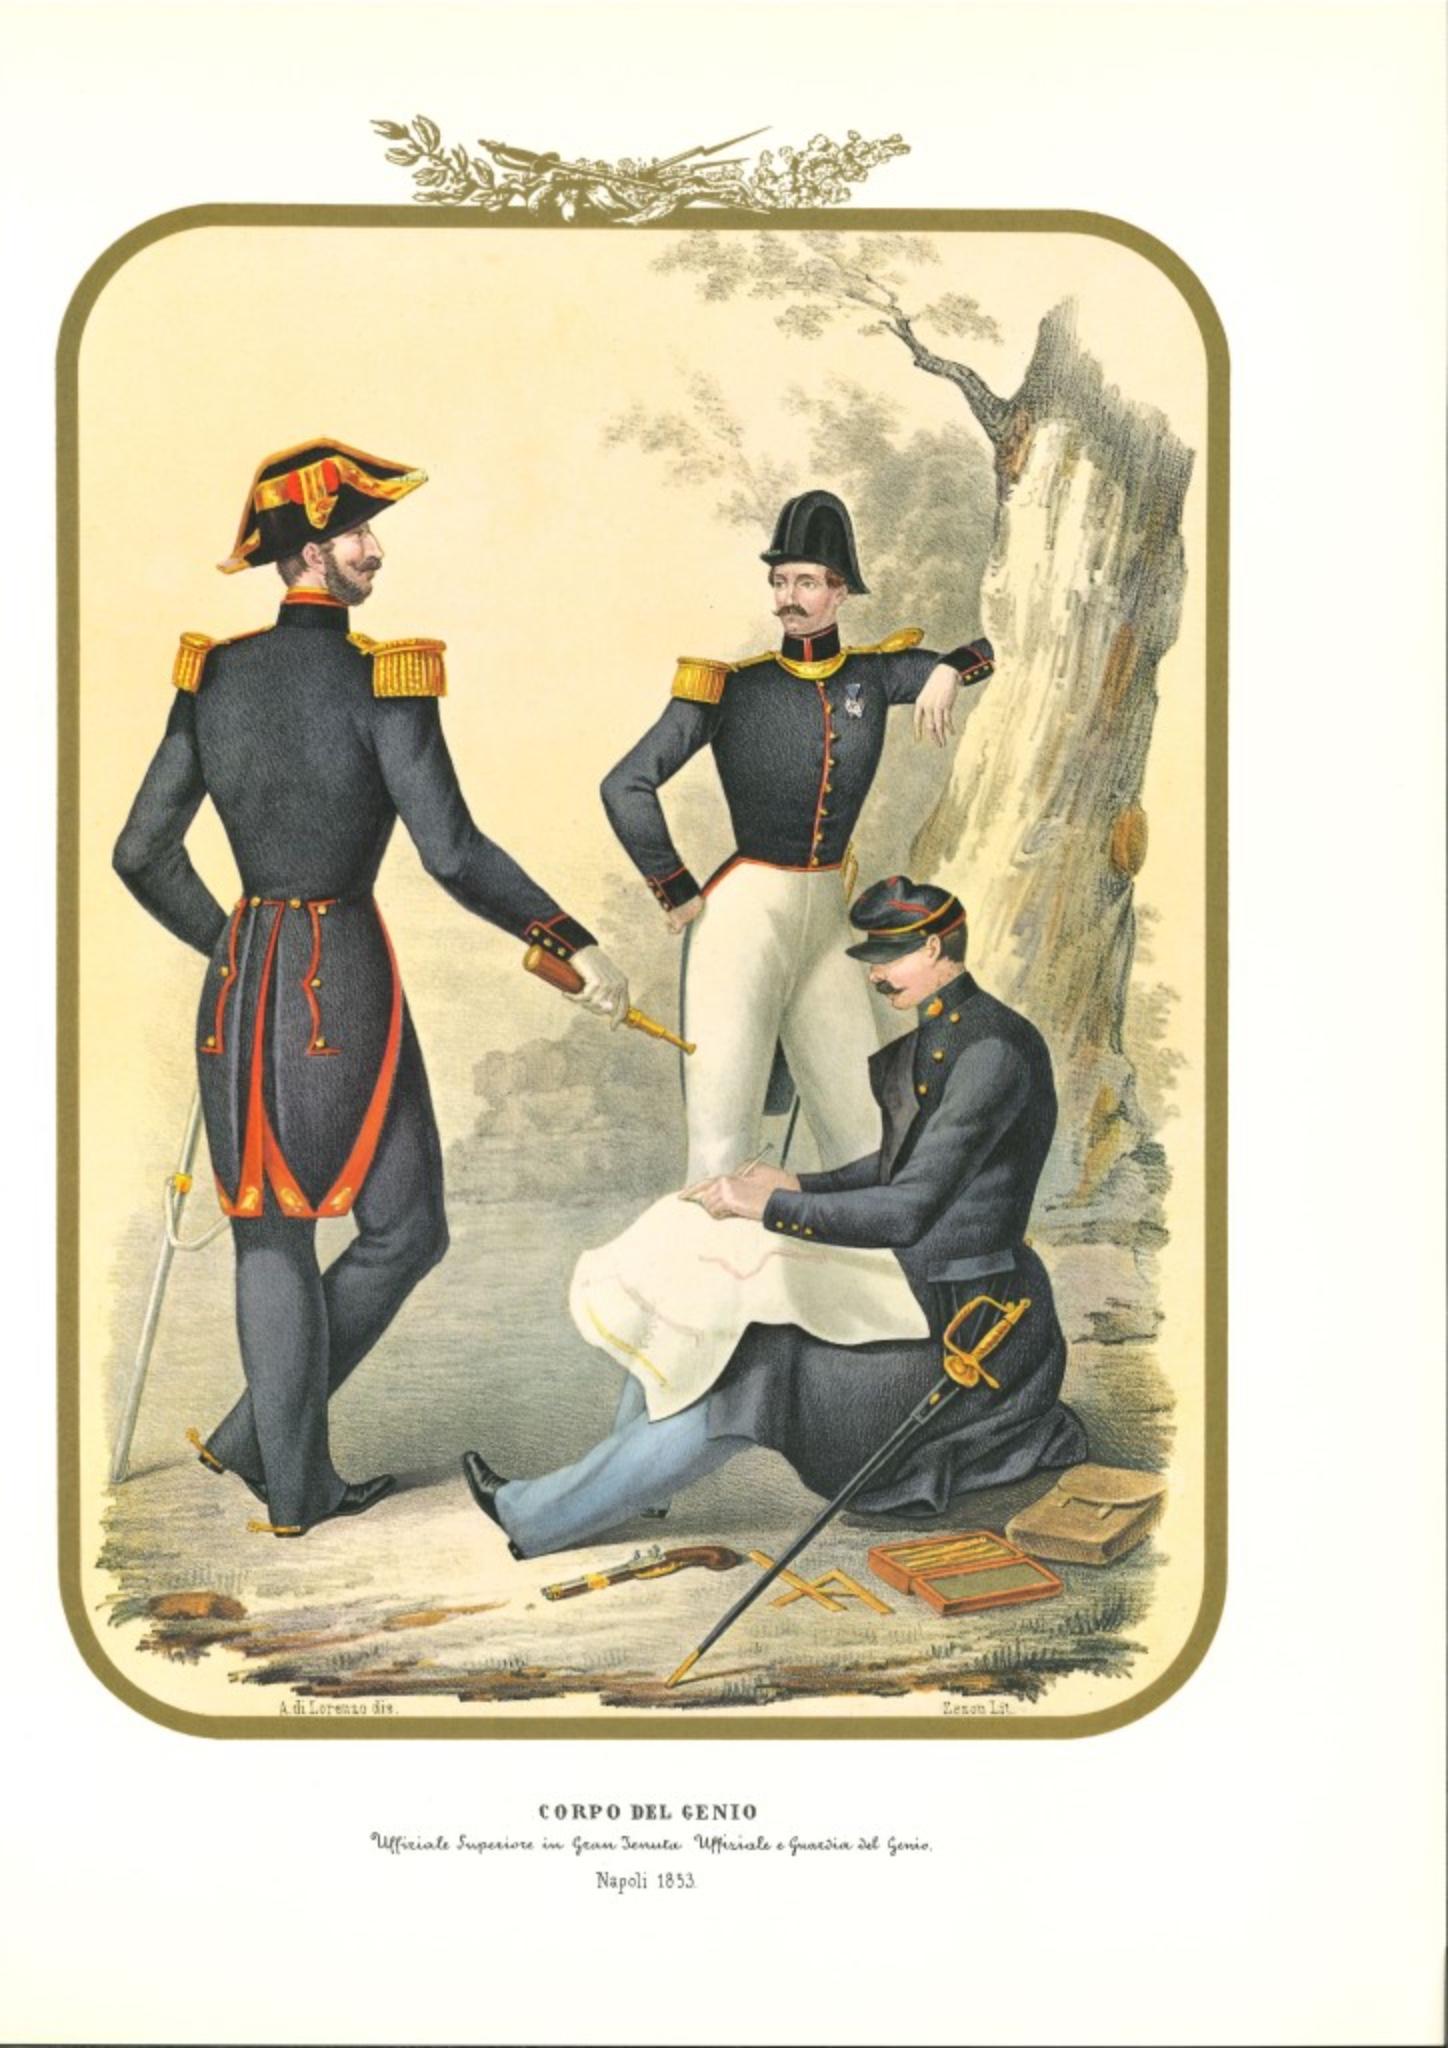 The Genius Corps is an original lithograph by Antonio Zezon. Naples 1853.

Interesting colored lithograph which describes a Superior Official in great condition, an Official and a Guard of the Genius.

In excellent condition, this print belongs to